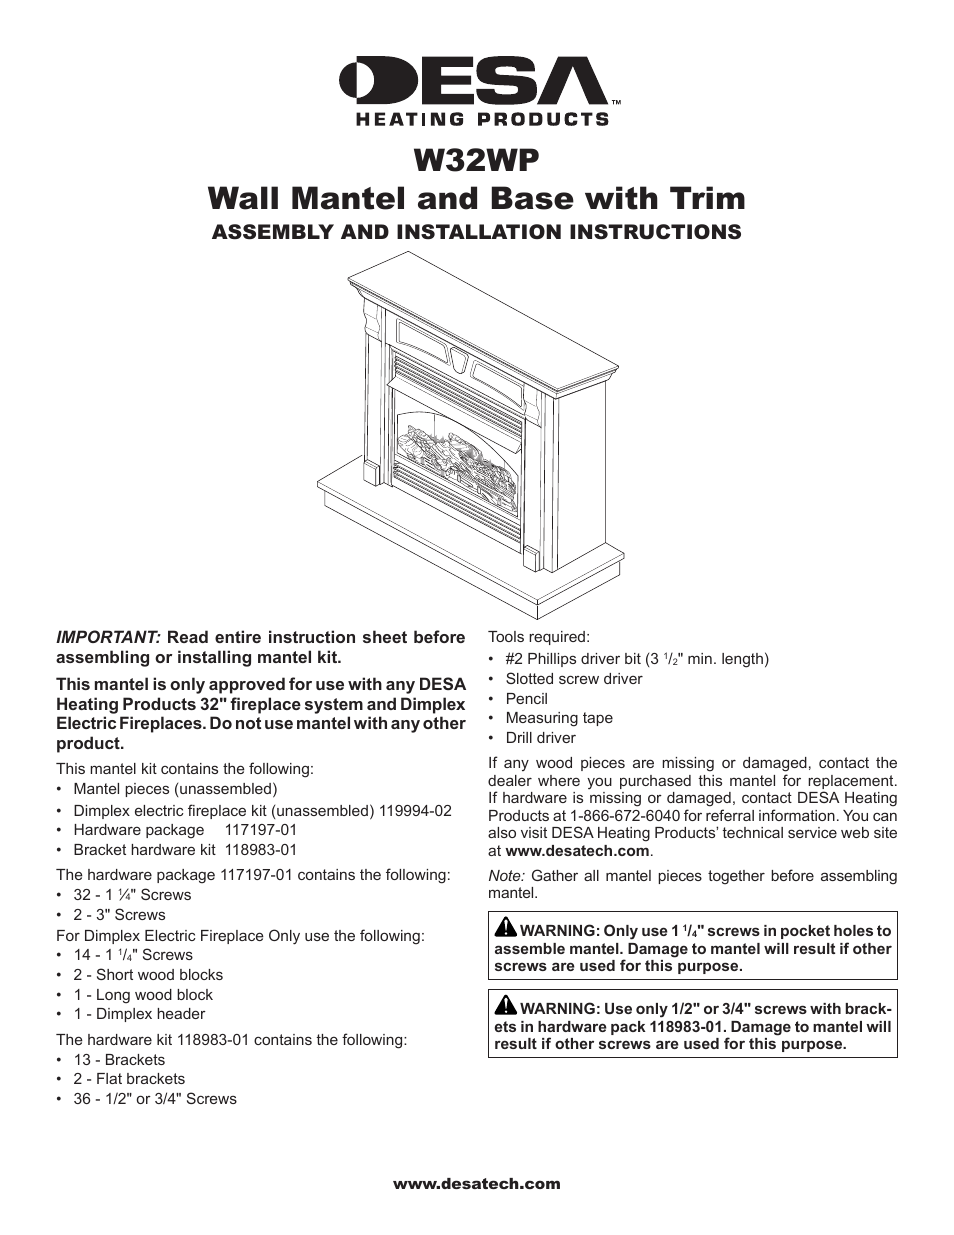 Wall Mantel and Base with Trim W32WP